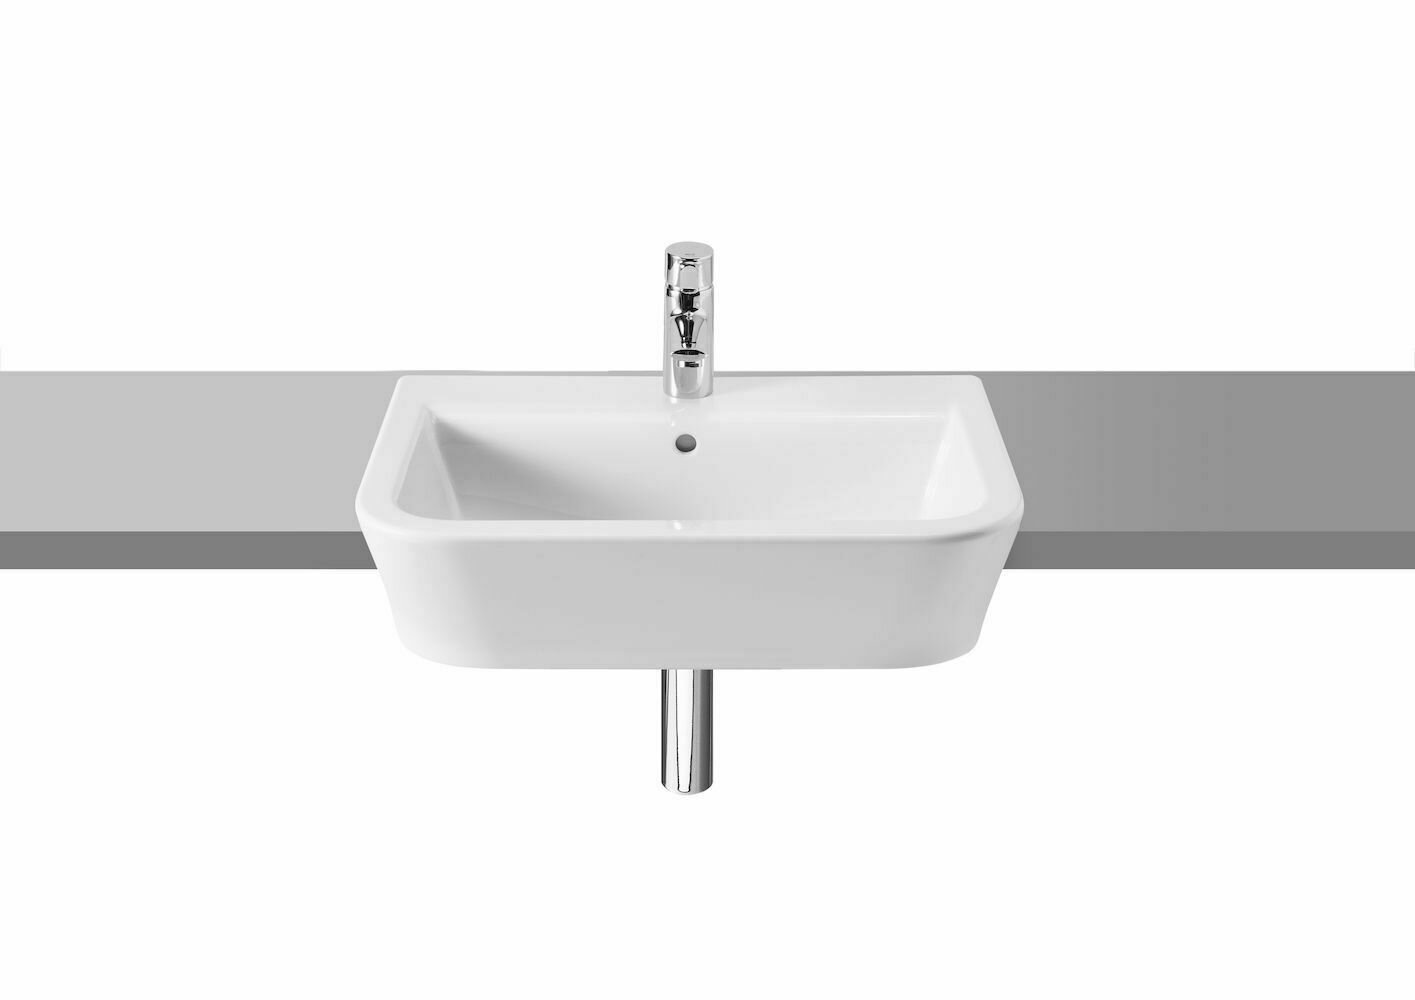 Roca The Gap Semi Recessed Basin ONLY 560x400mm A32747S000